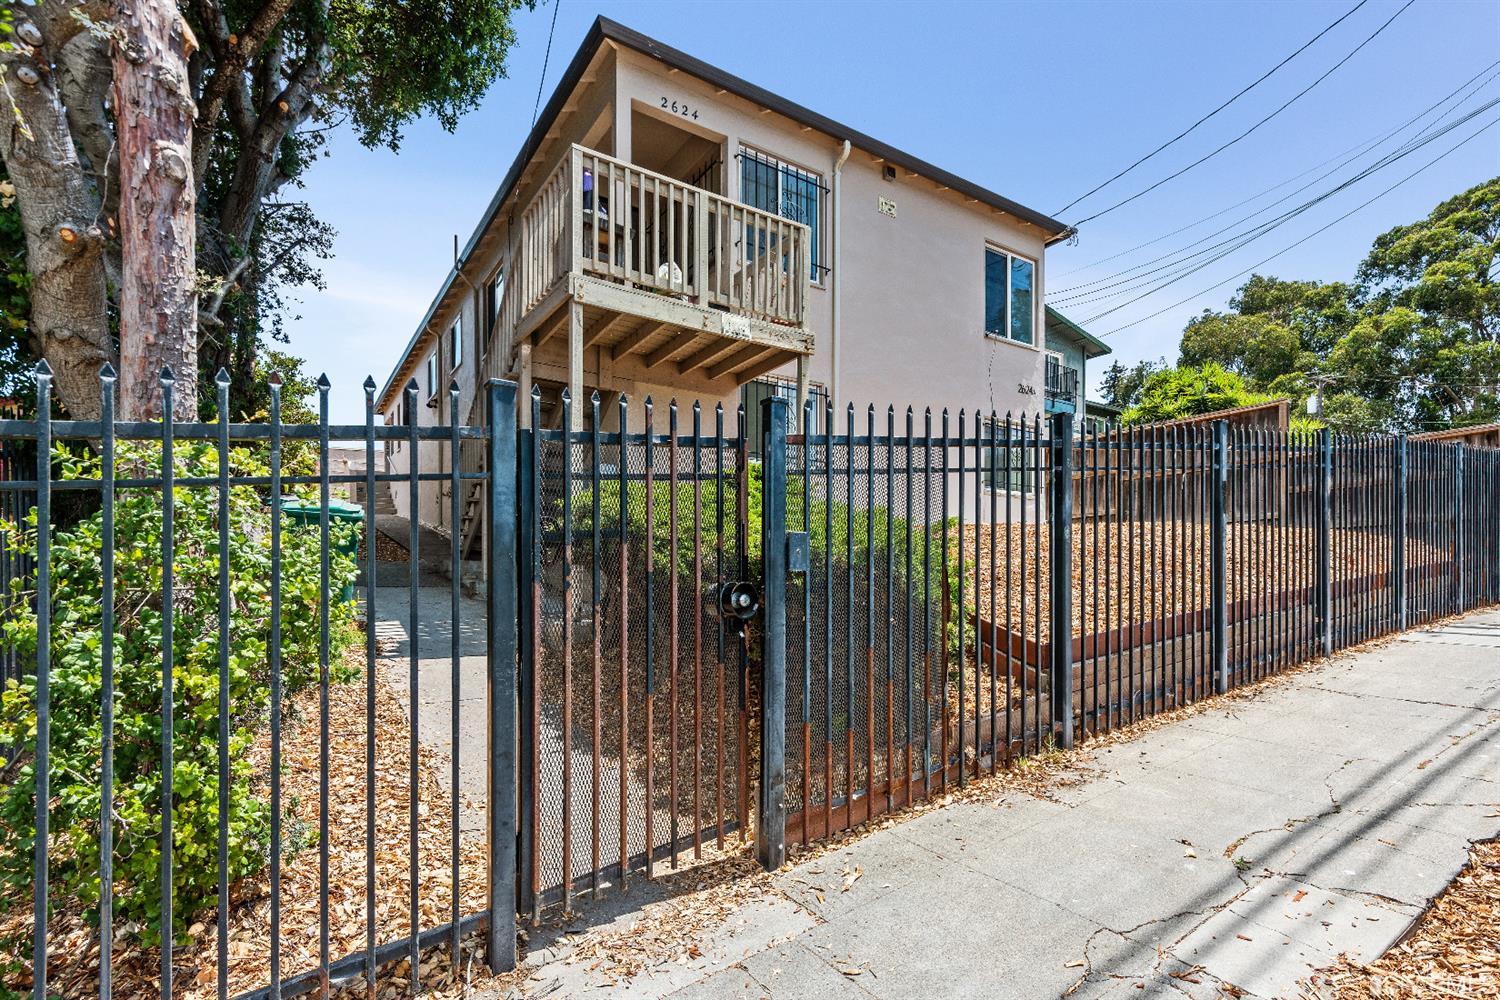 a view of a house with iron fence